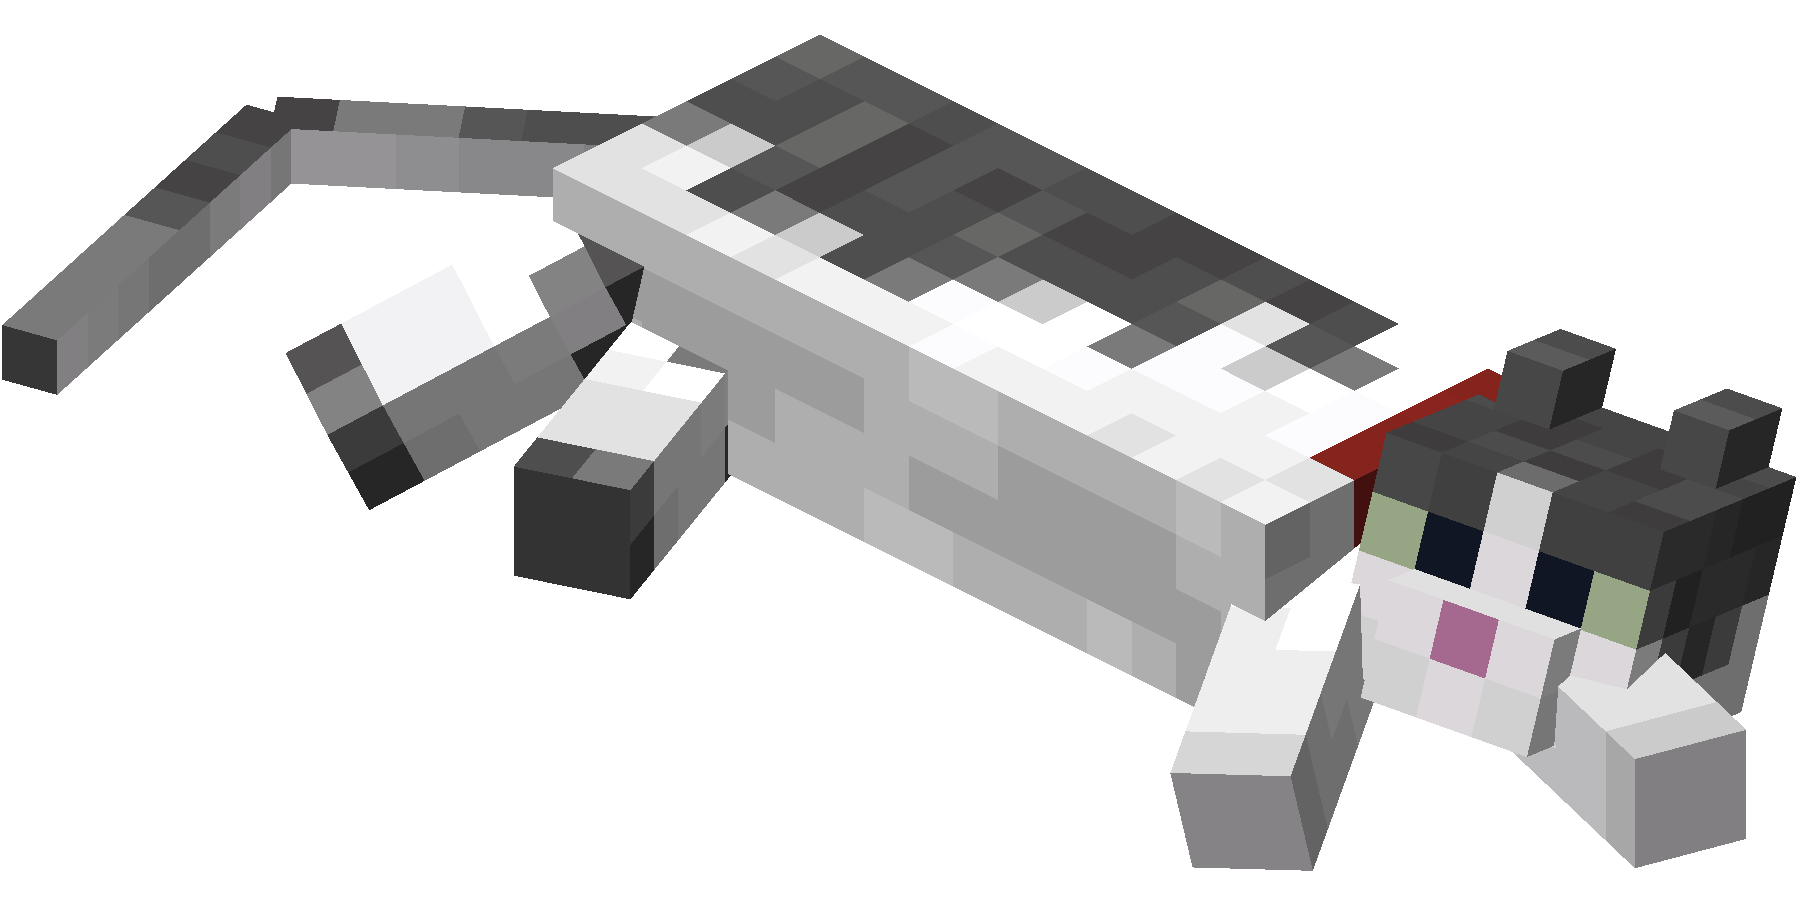 Arquivo:Lying down Jellie Cat with Red Collar.png - Minecraft Wiki Oficial.